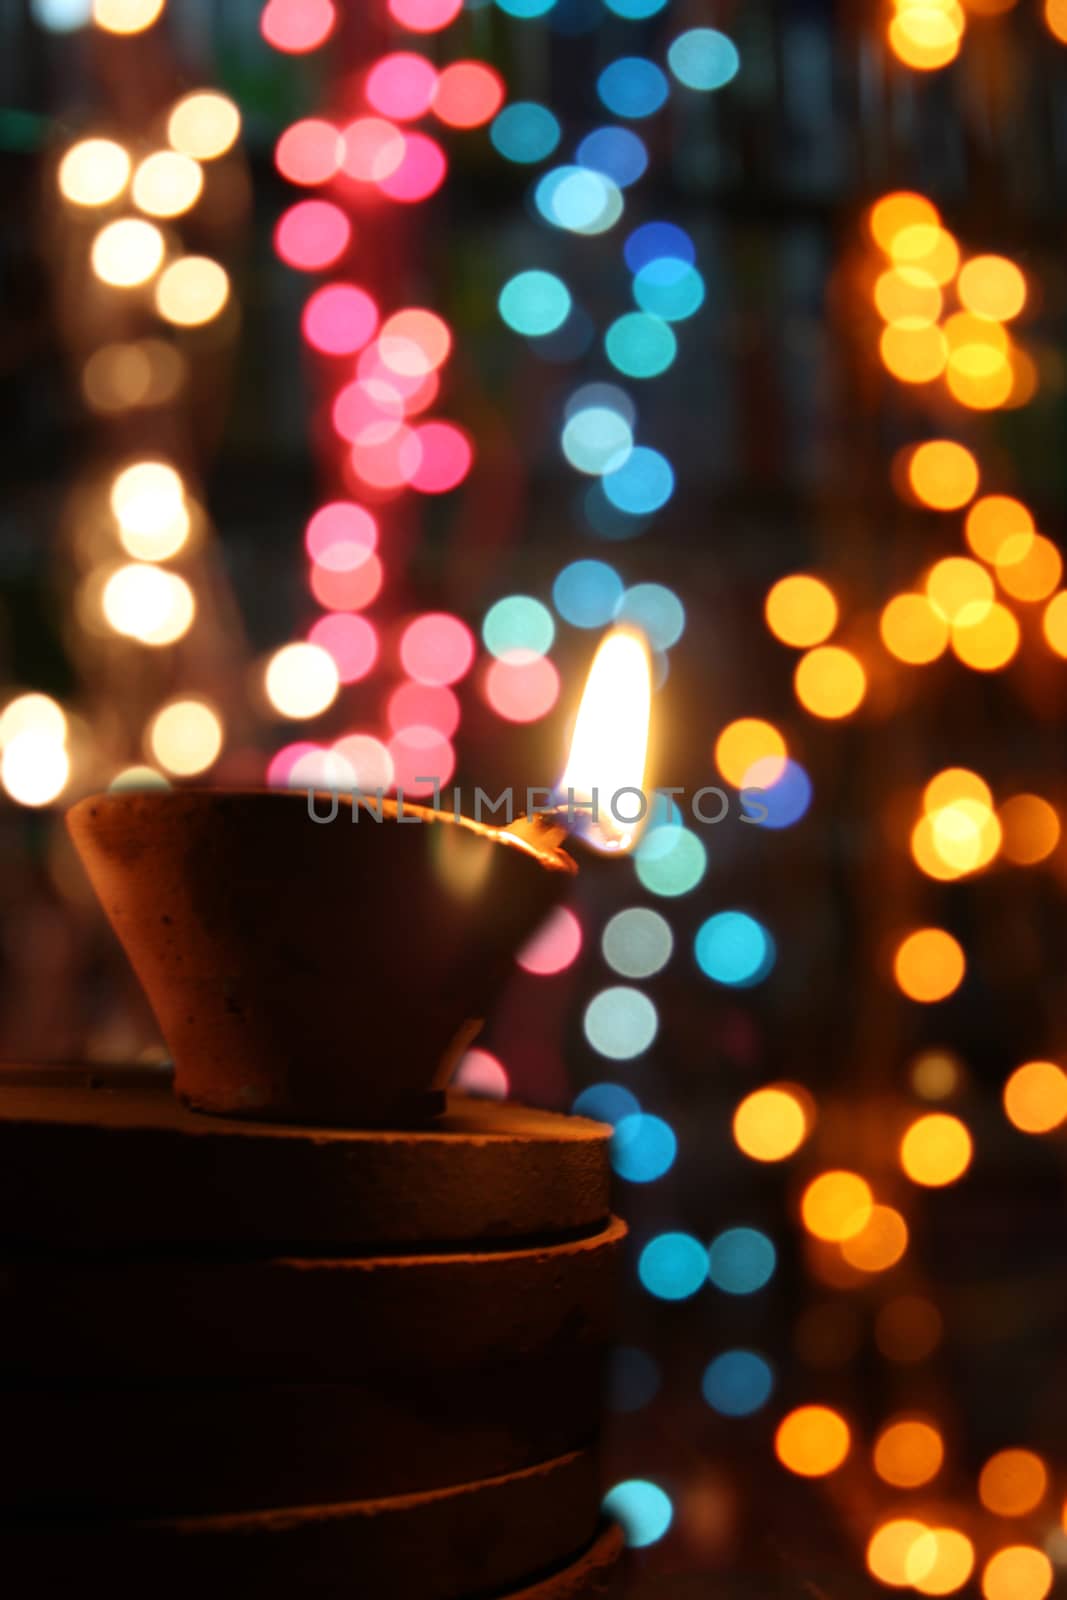 Traditional Diwali lamps in colorful blur festive lights during Diwali festival in India.